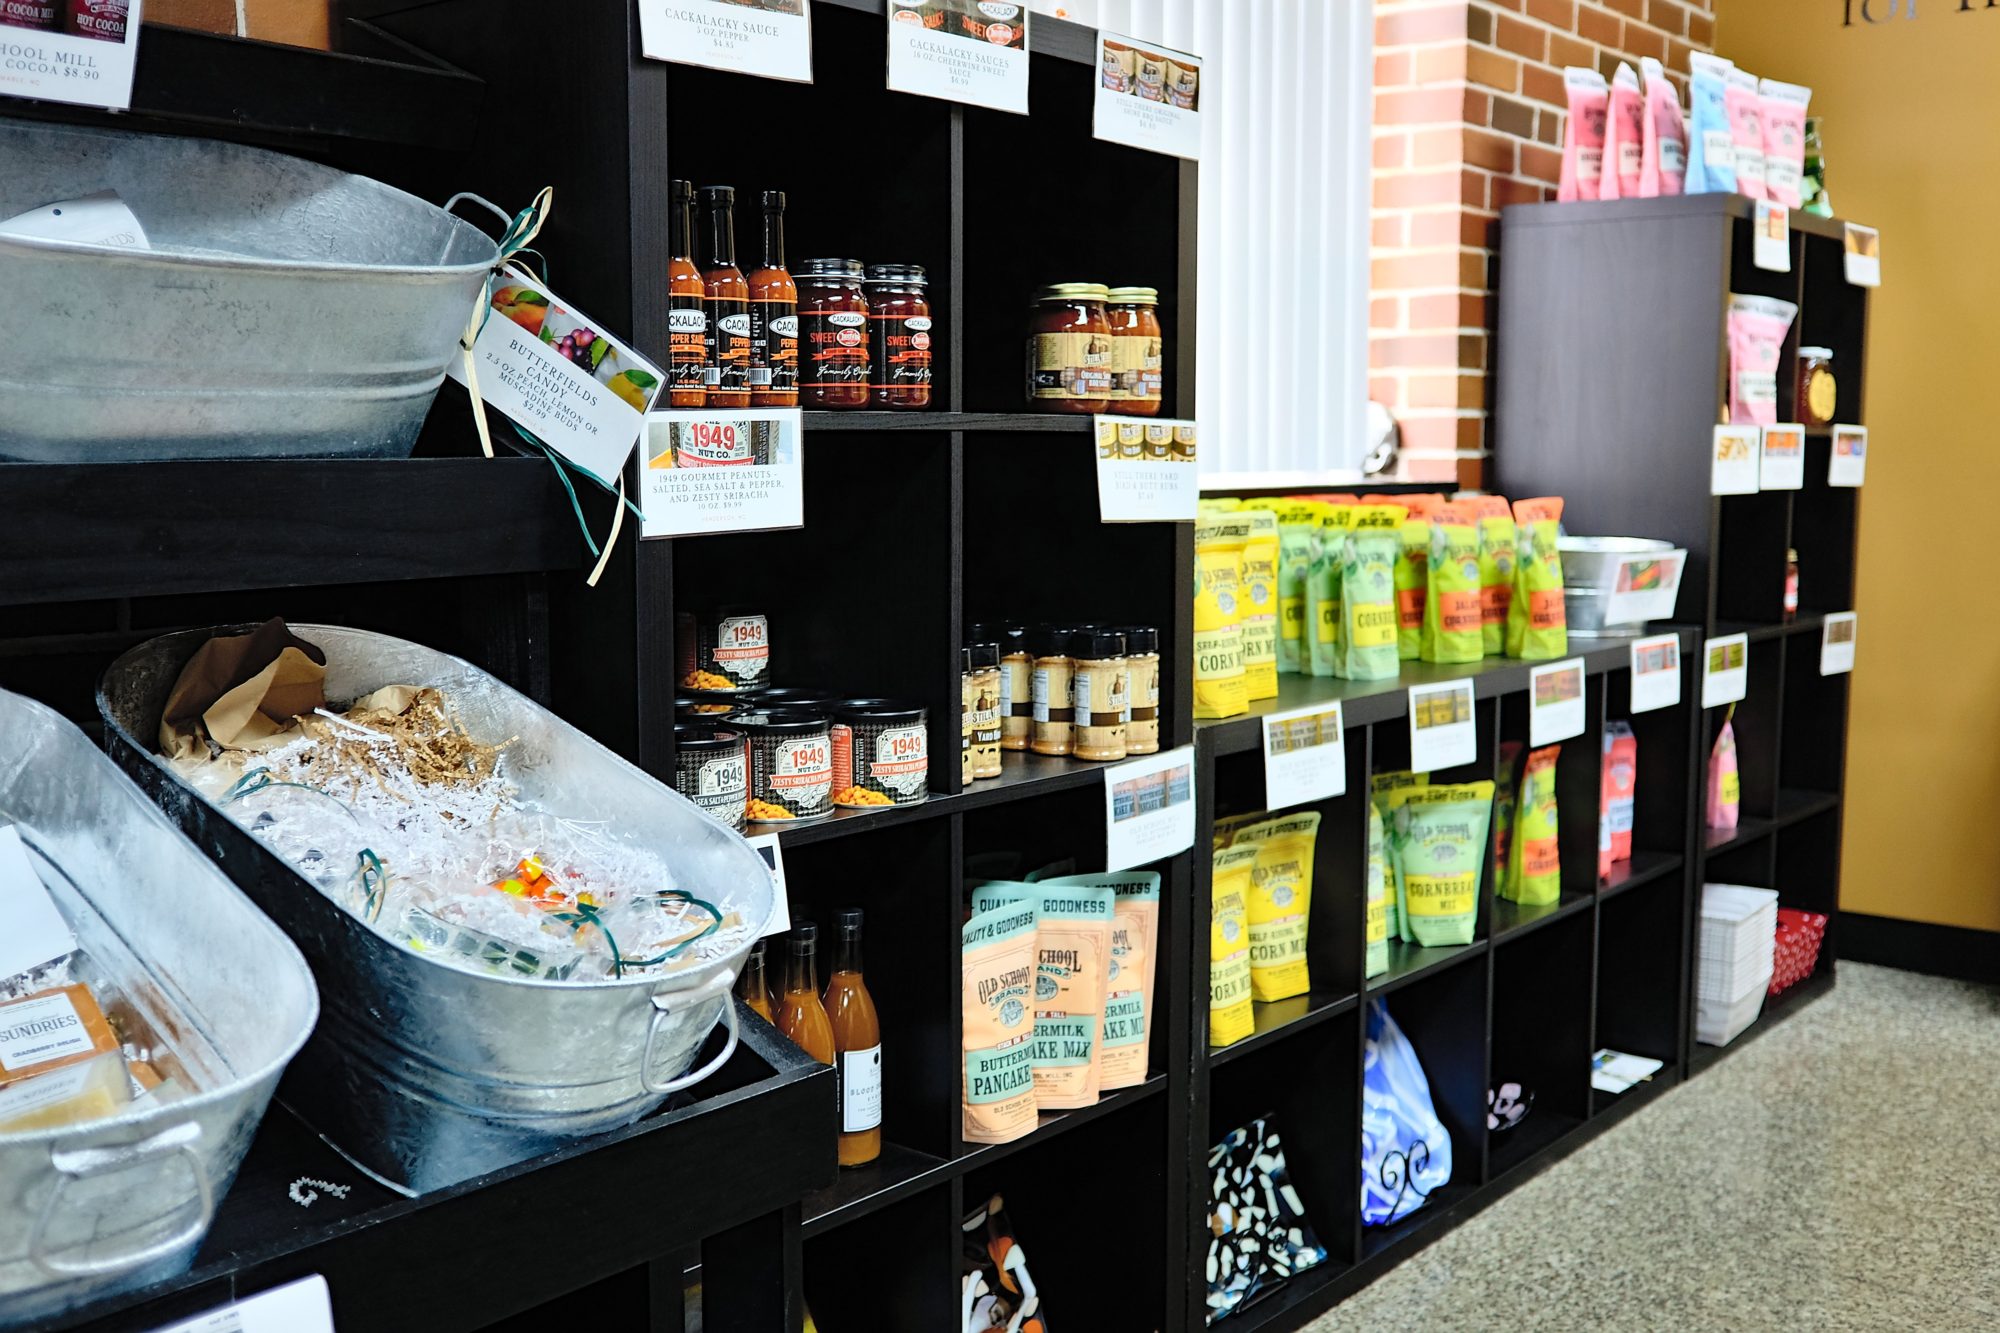 The Market at Sundries with shelves of local food and art items